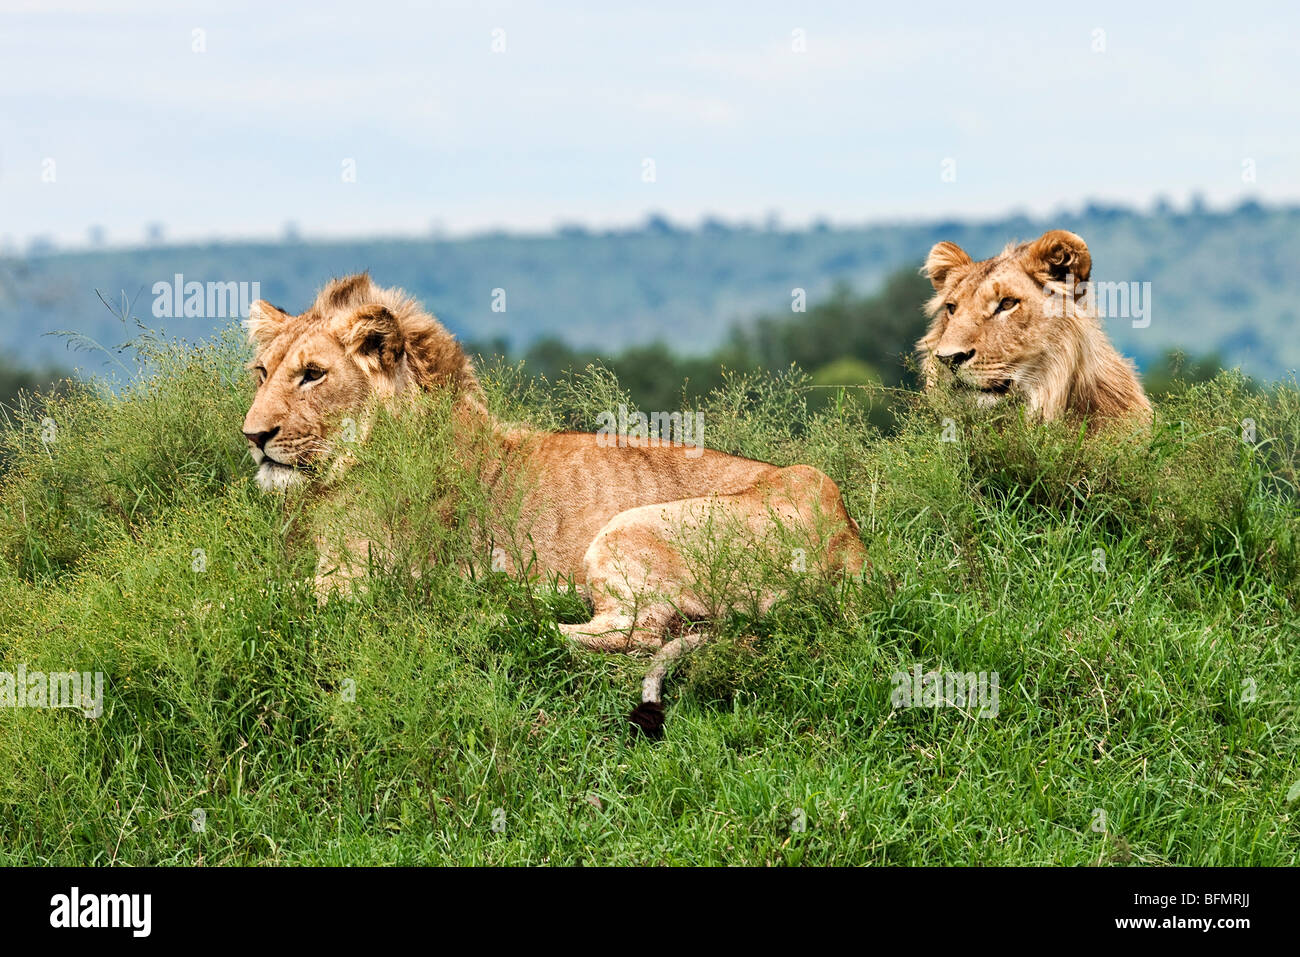 Kenya, Narok District. Two young lions keep watch on a mound in the Maasai Mara Game Reserve. Stock Photo